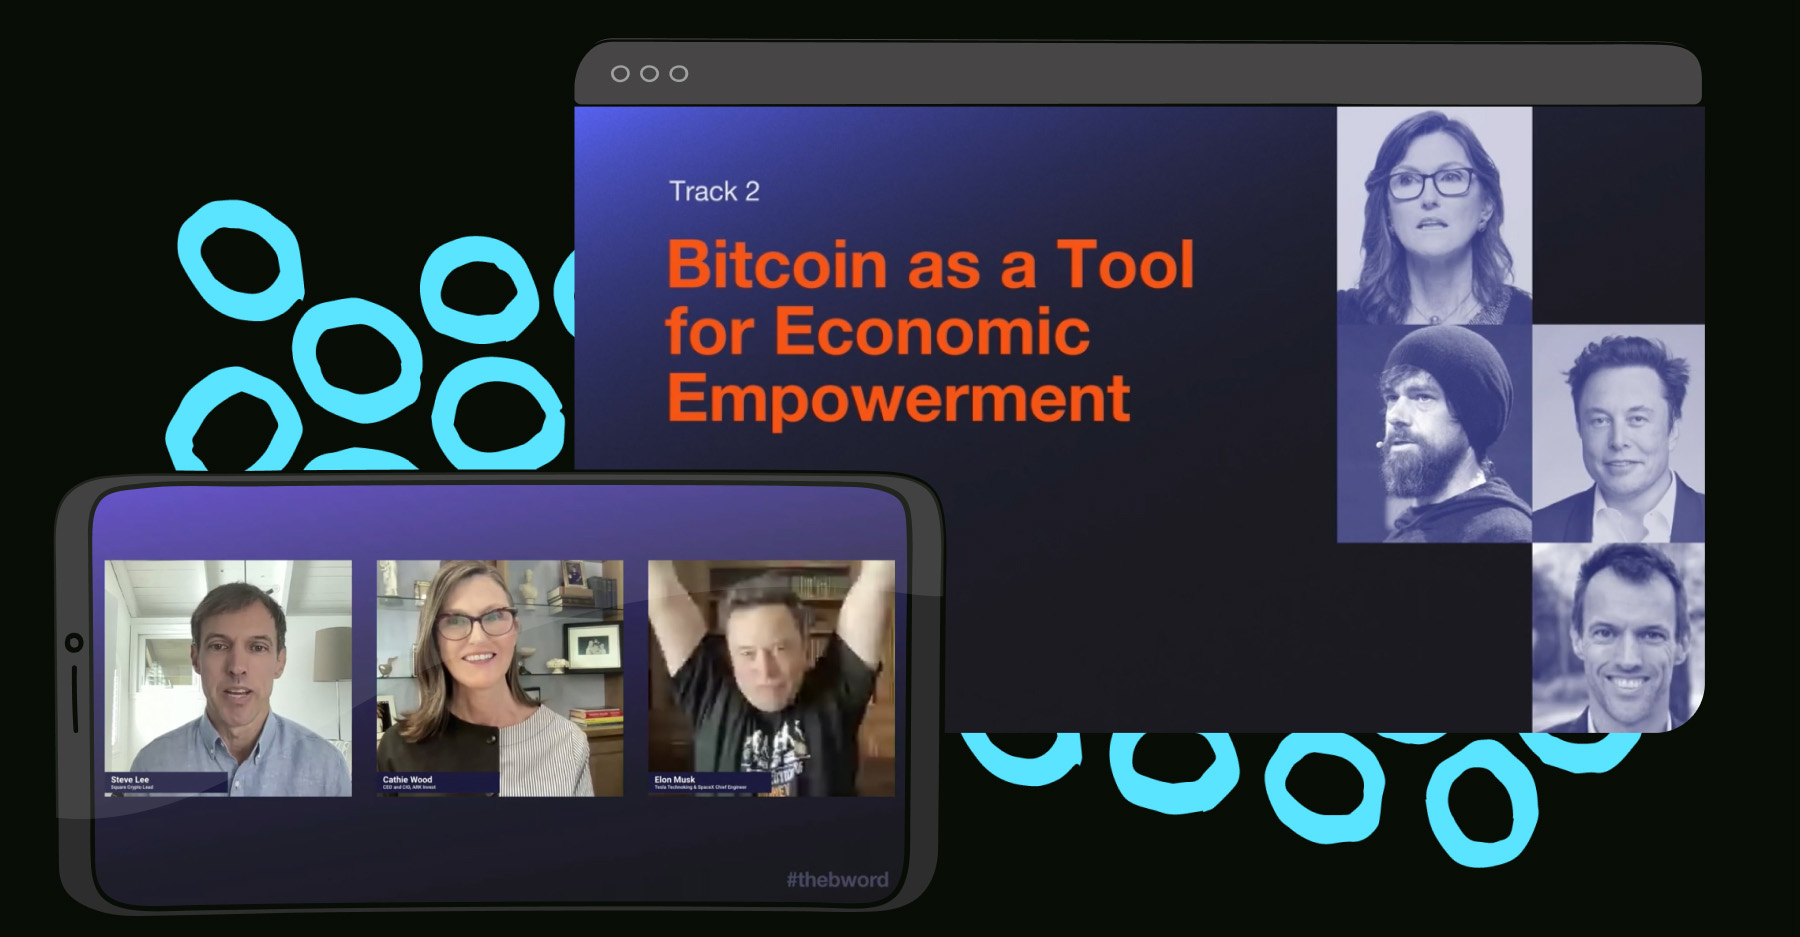 Livestream of a virtual session called "Bitcoin as a Tool for Economic Empowerment"